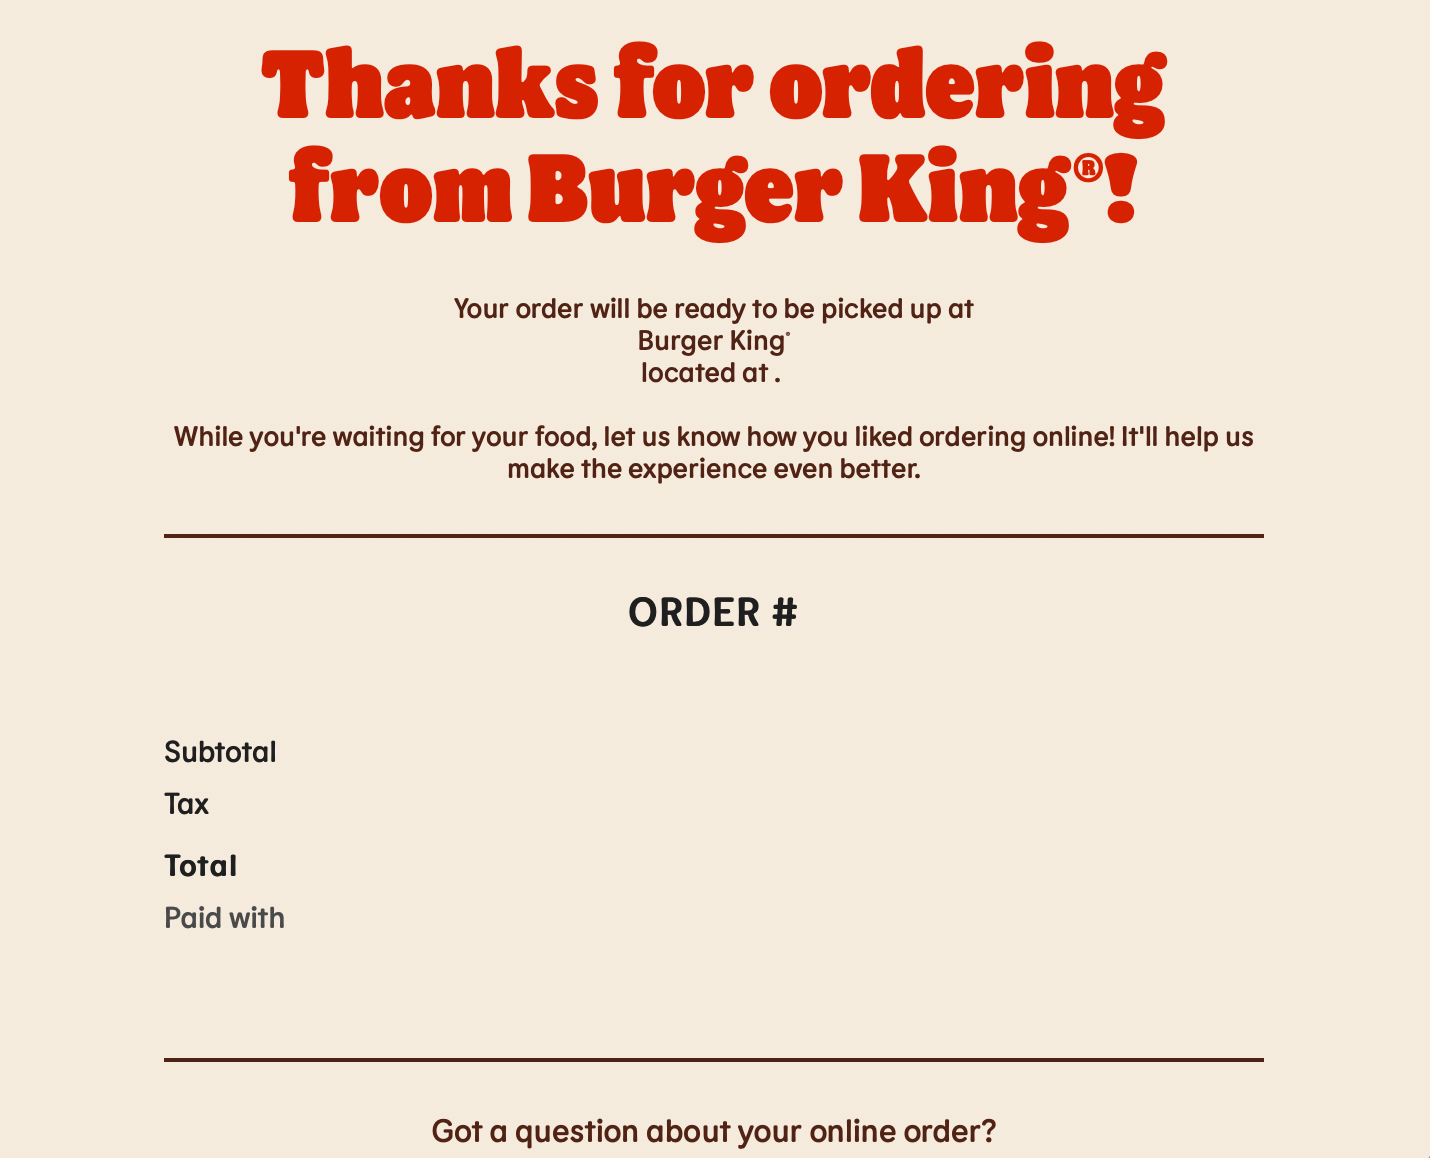 "Thanks for ordering from Burger King®! Your order will be ready to be picked up at Burger King® located at . While you're waiting for your food, let us know how you liked ordering online! It'll help us make the experience even better."